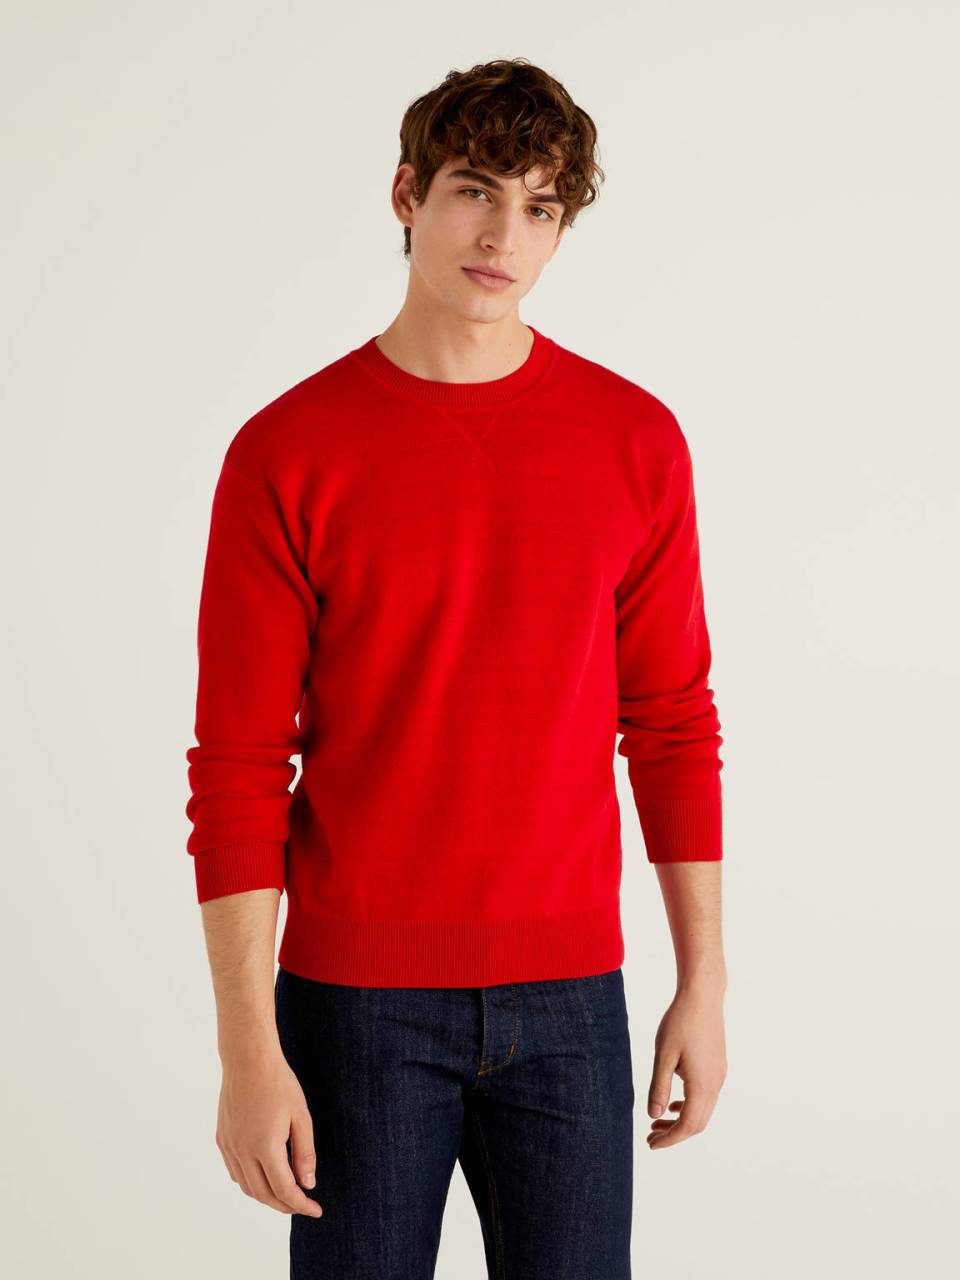 Benetton Reversible sweater in tricot cotton. 1